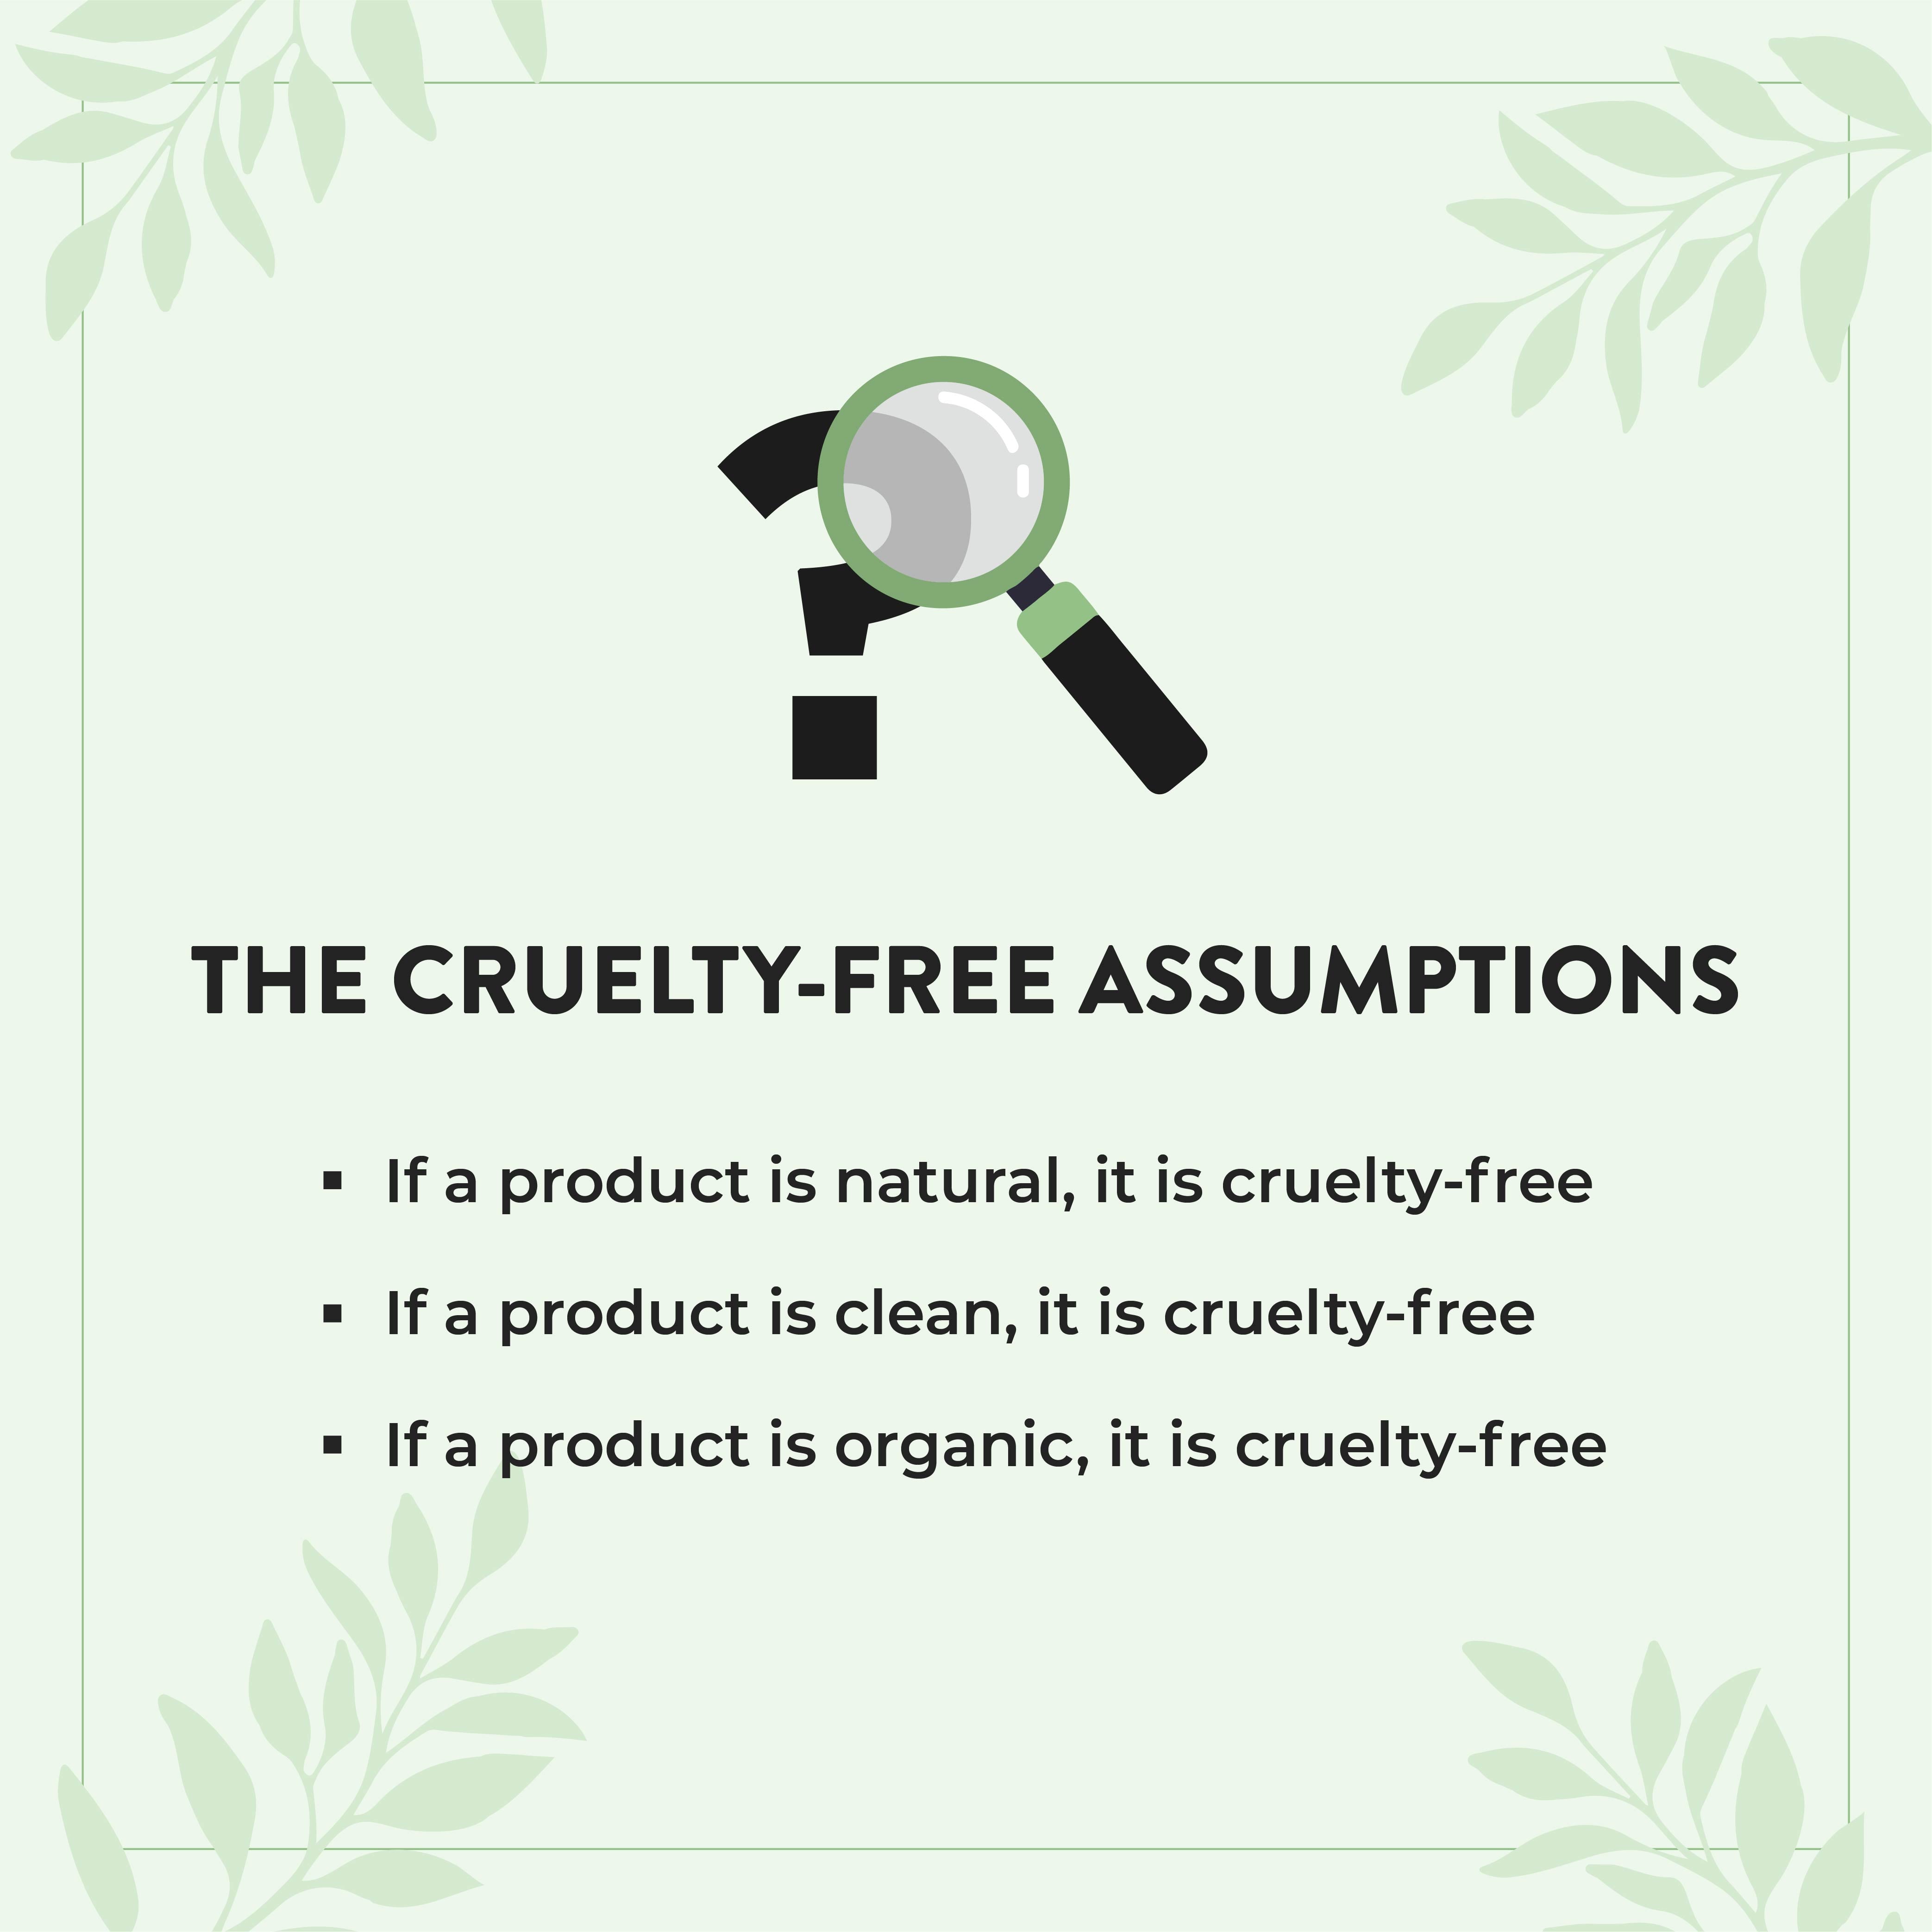 This is an image of the cruelty free assumptions 